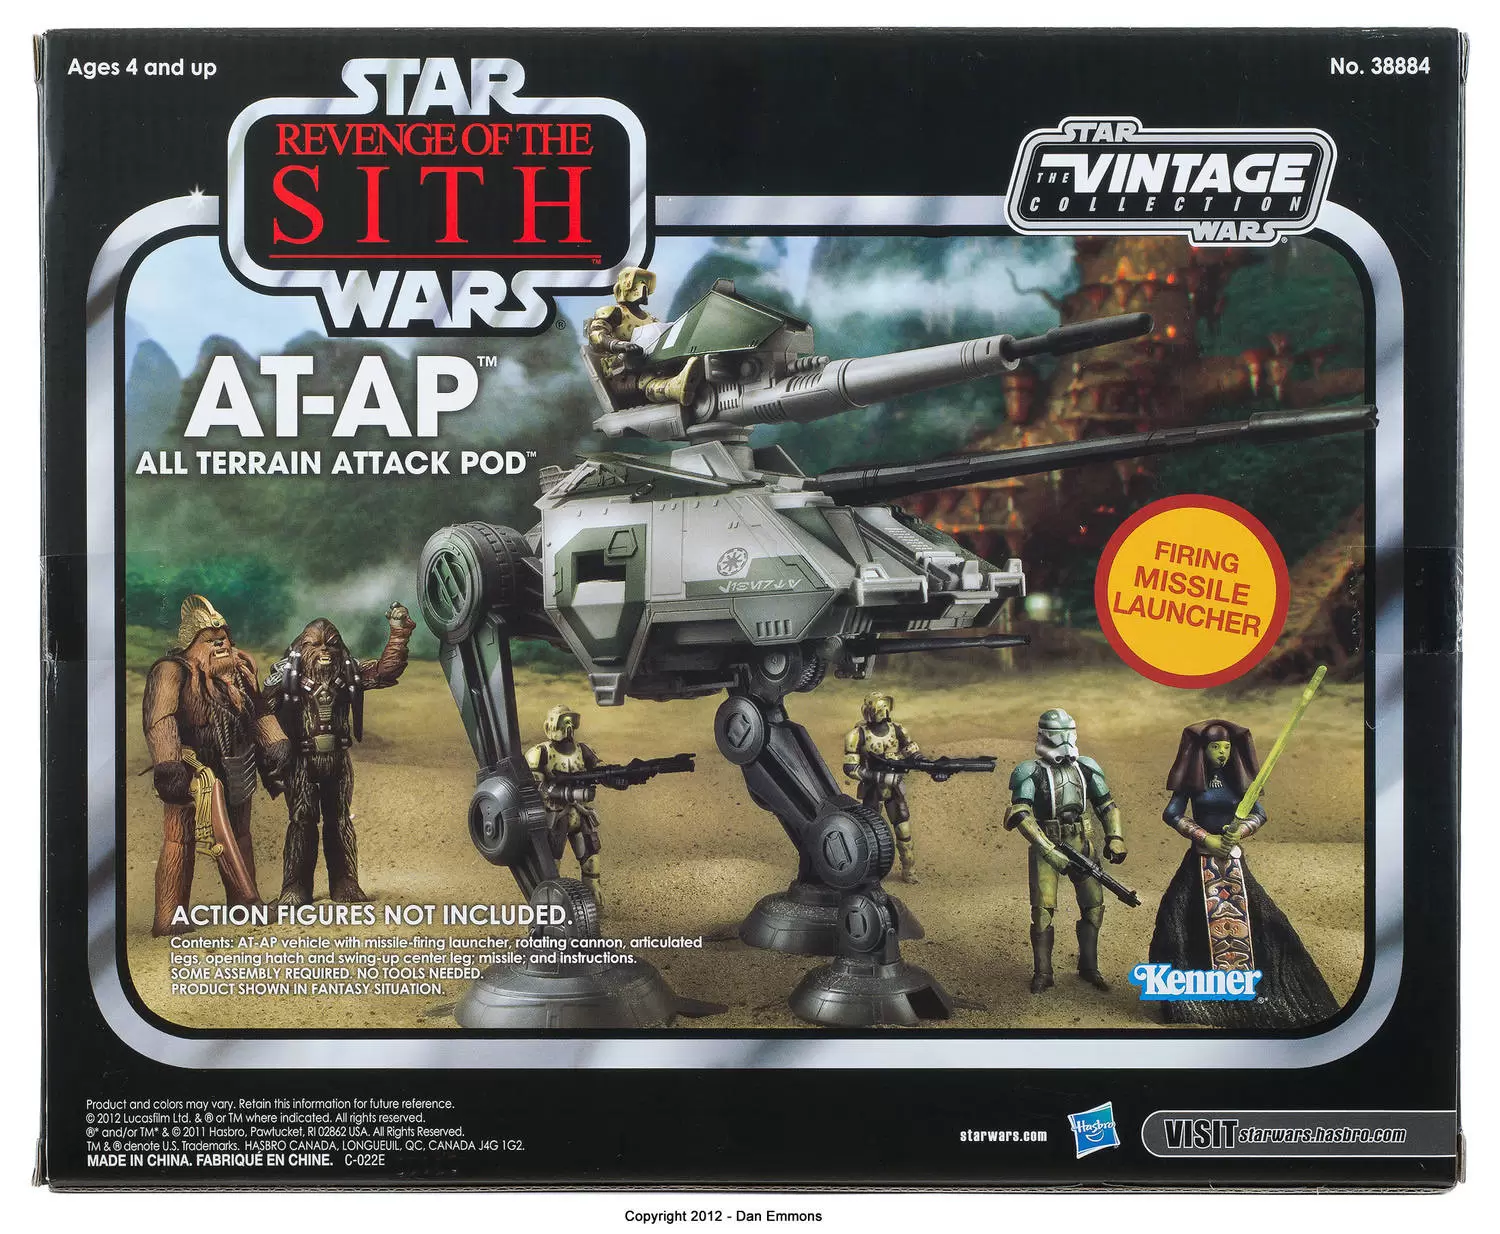 The Vintage Collection - AT-AP (All Terrain Attack Pod)